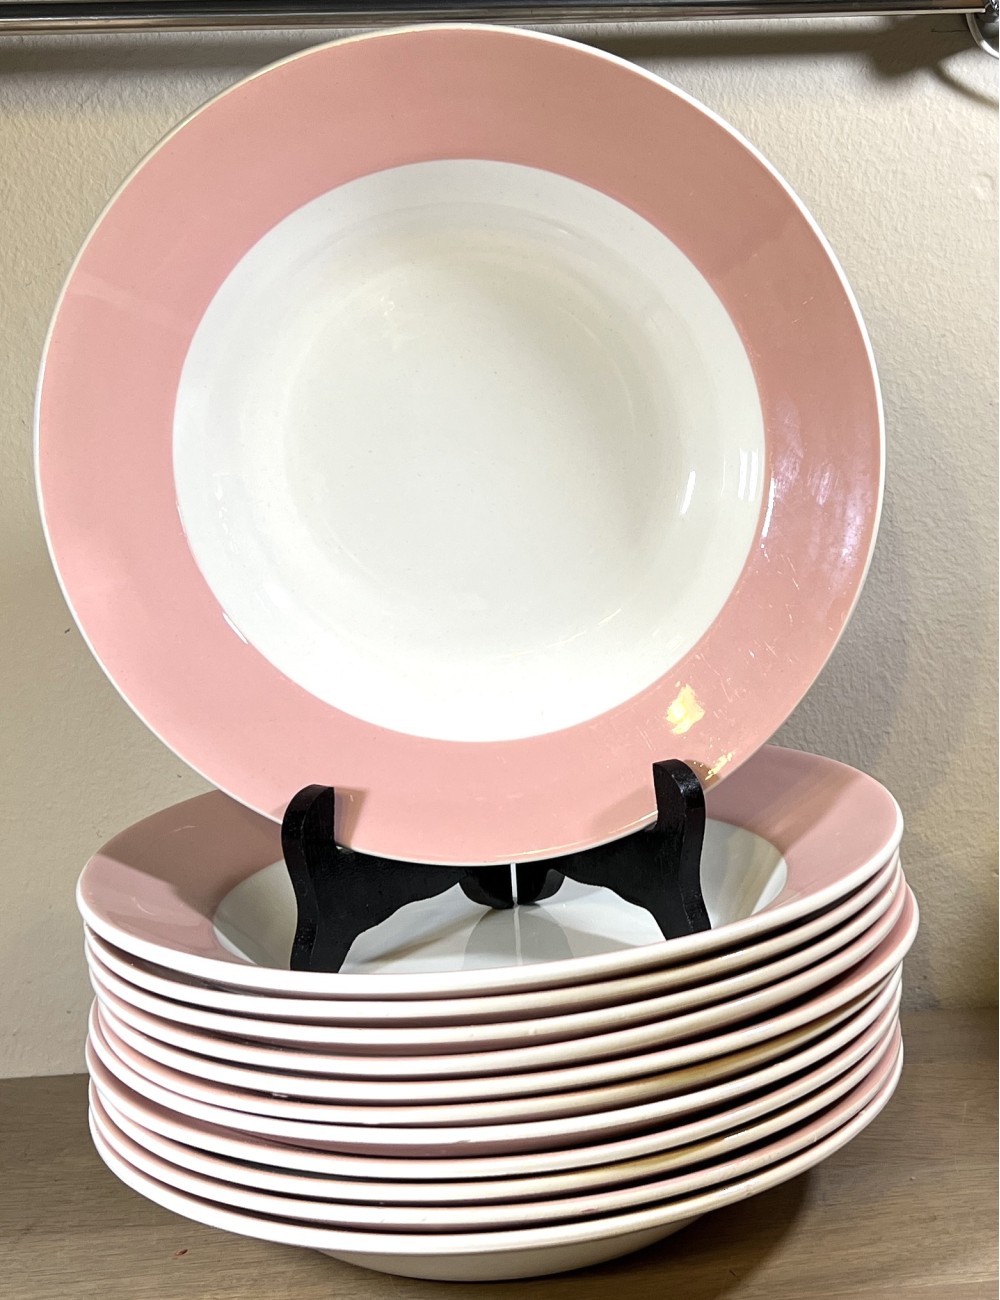 Deep plate / Soup plate / Pasta plate - St. Amand - version with pastel pink, quite wide, rim